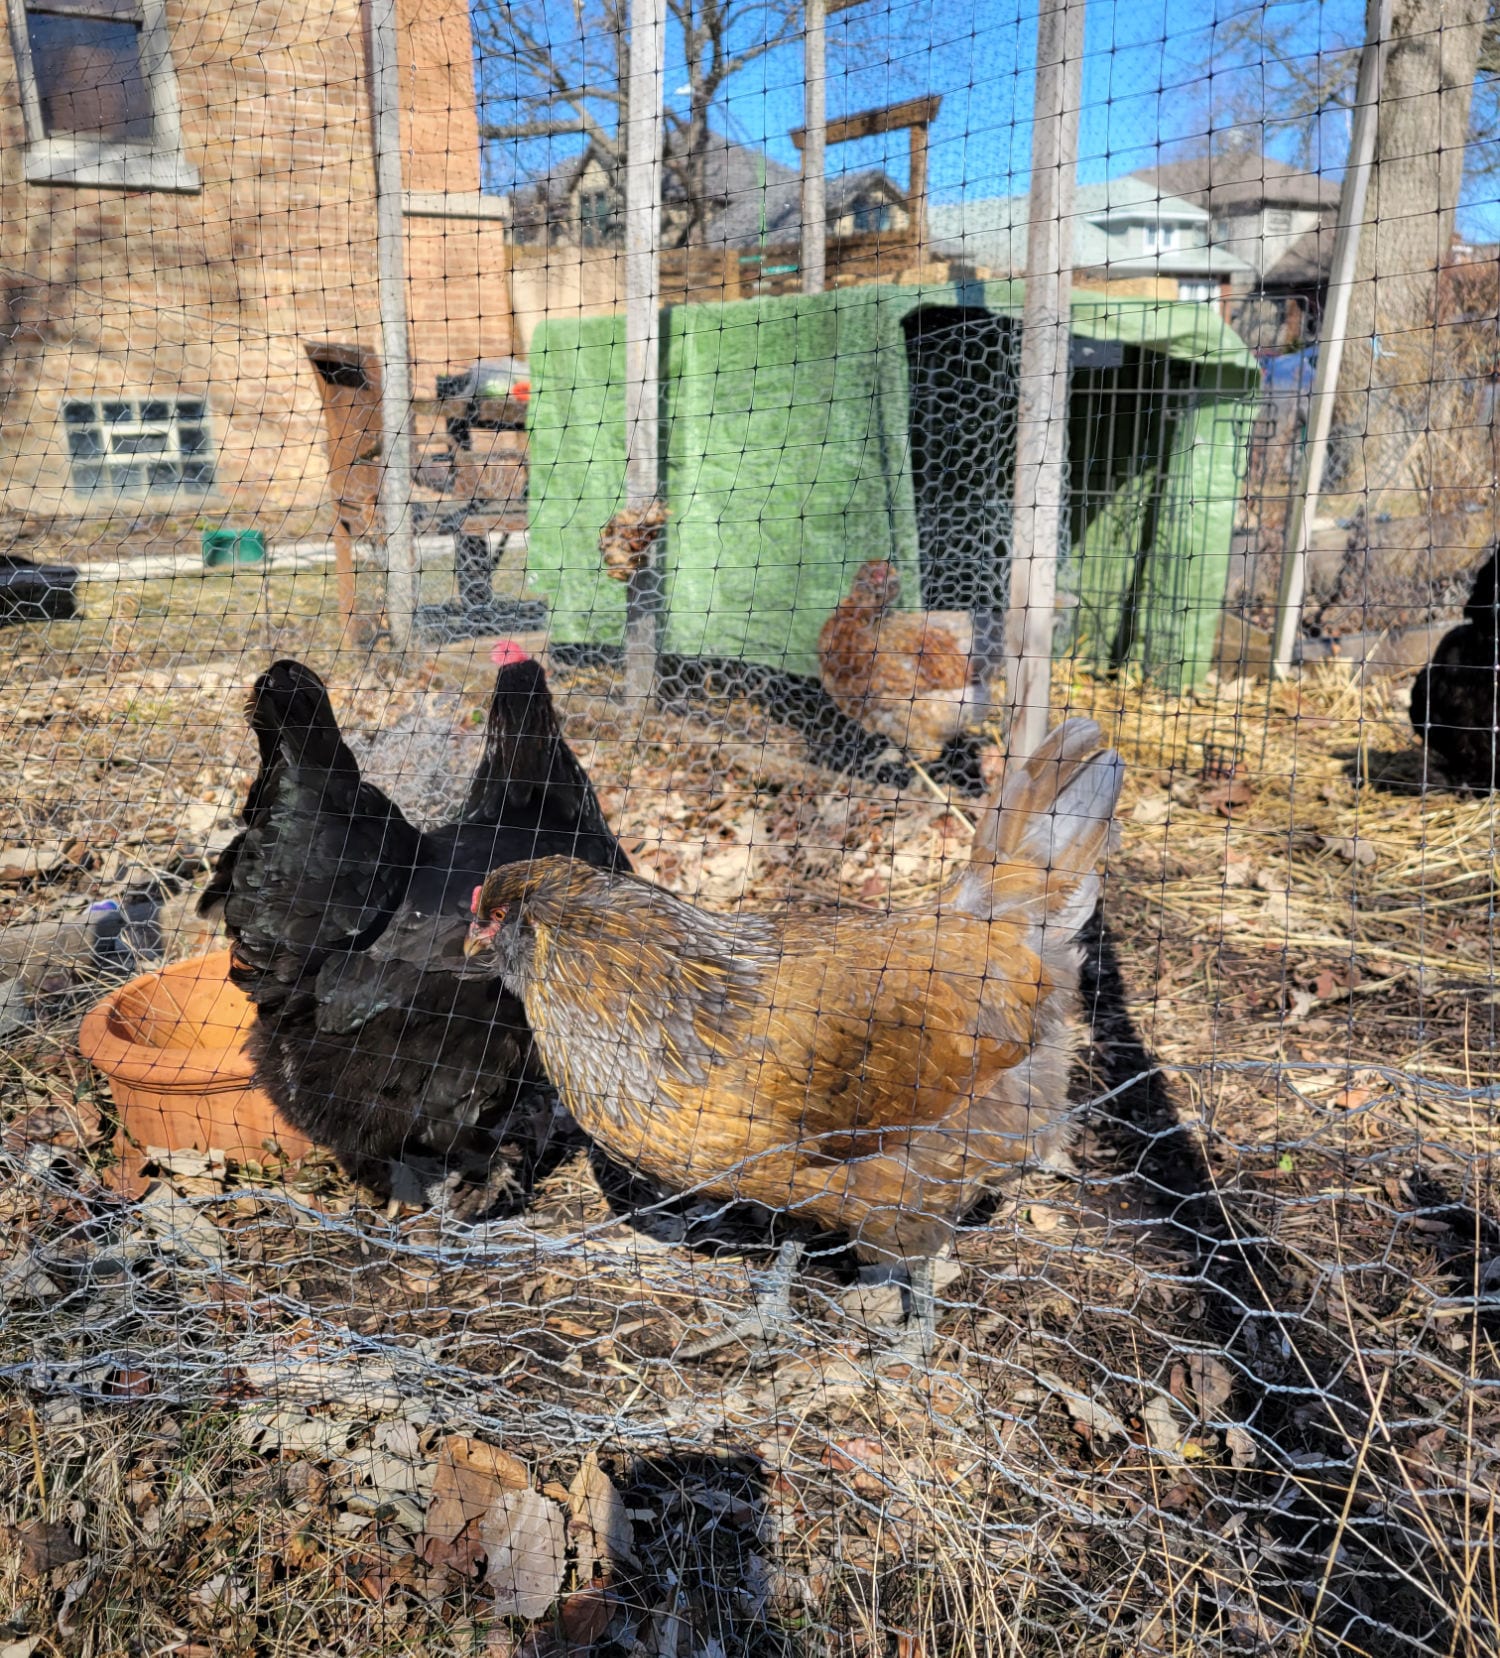 Three fluffy chickens in an outdoor coop on a sunny day